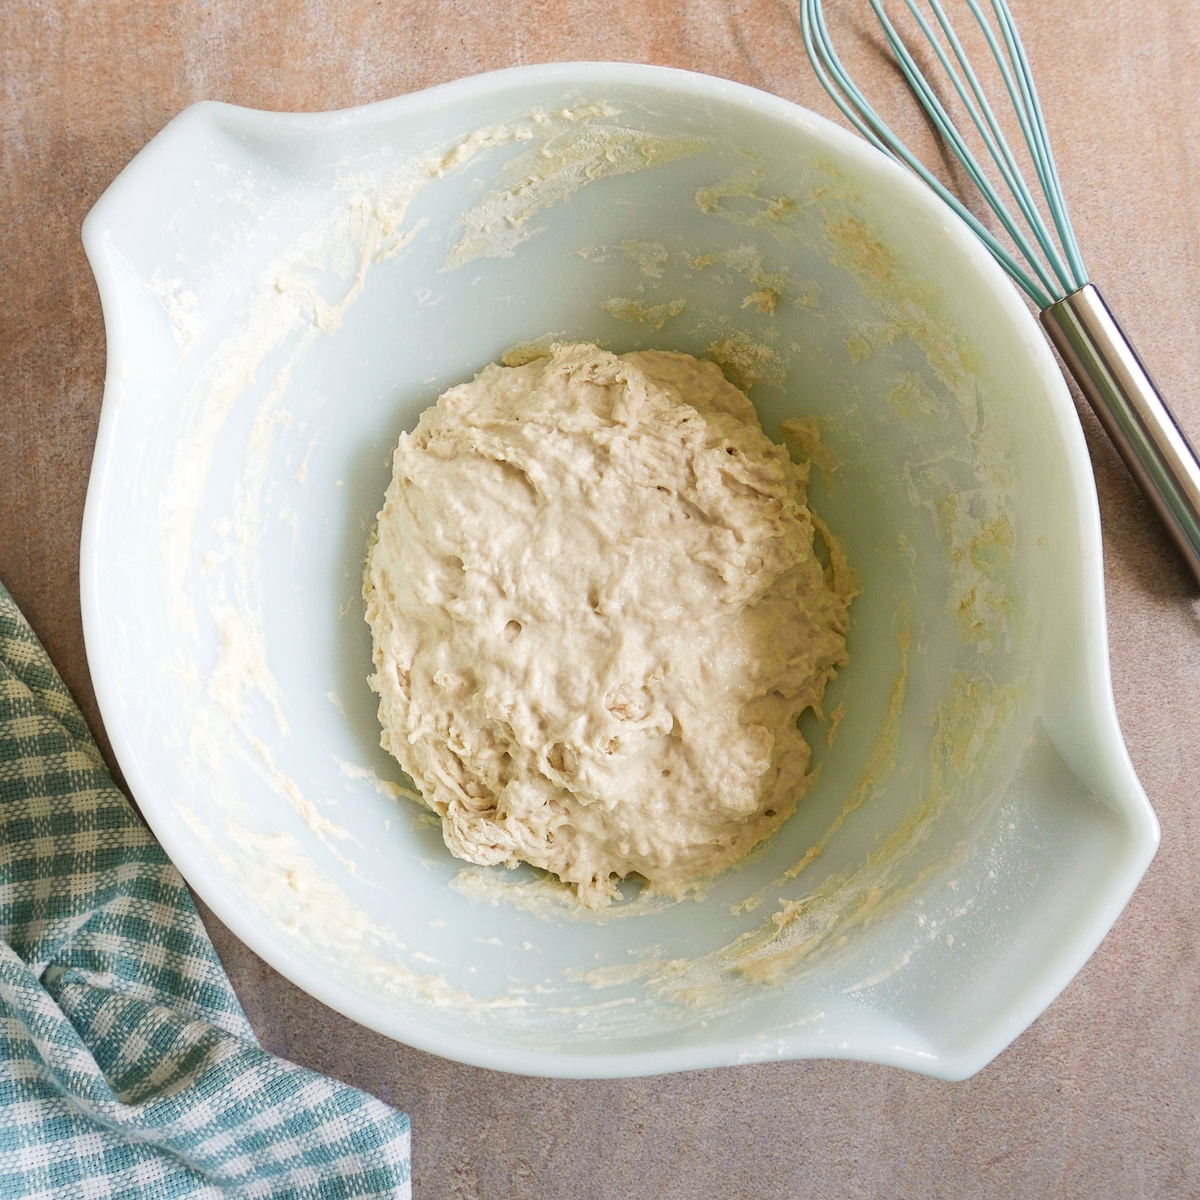 Dough in a mixing bowl with a whisk and napkin.